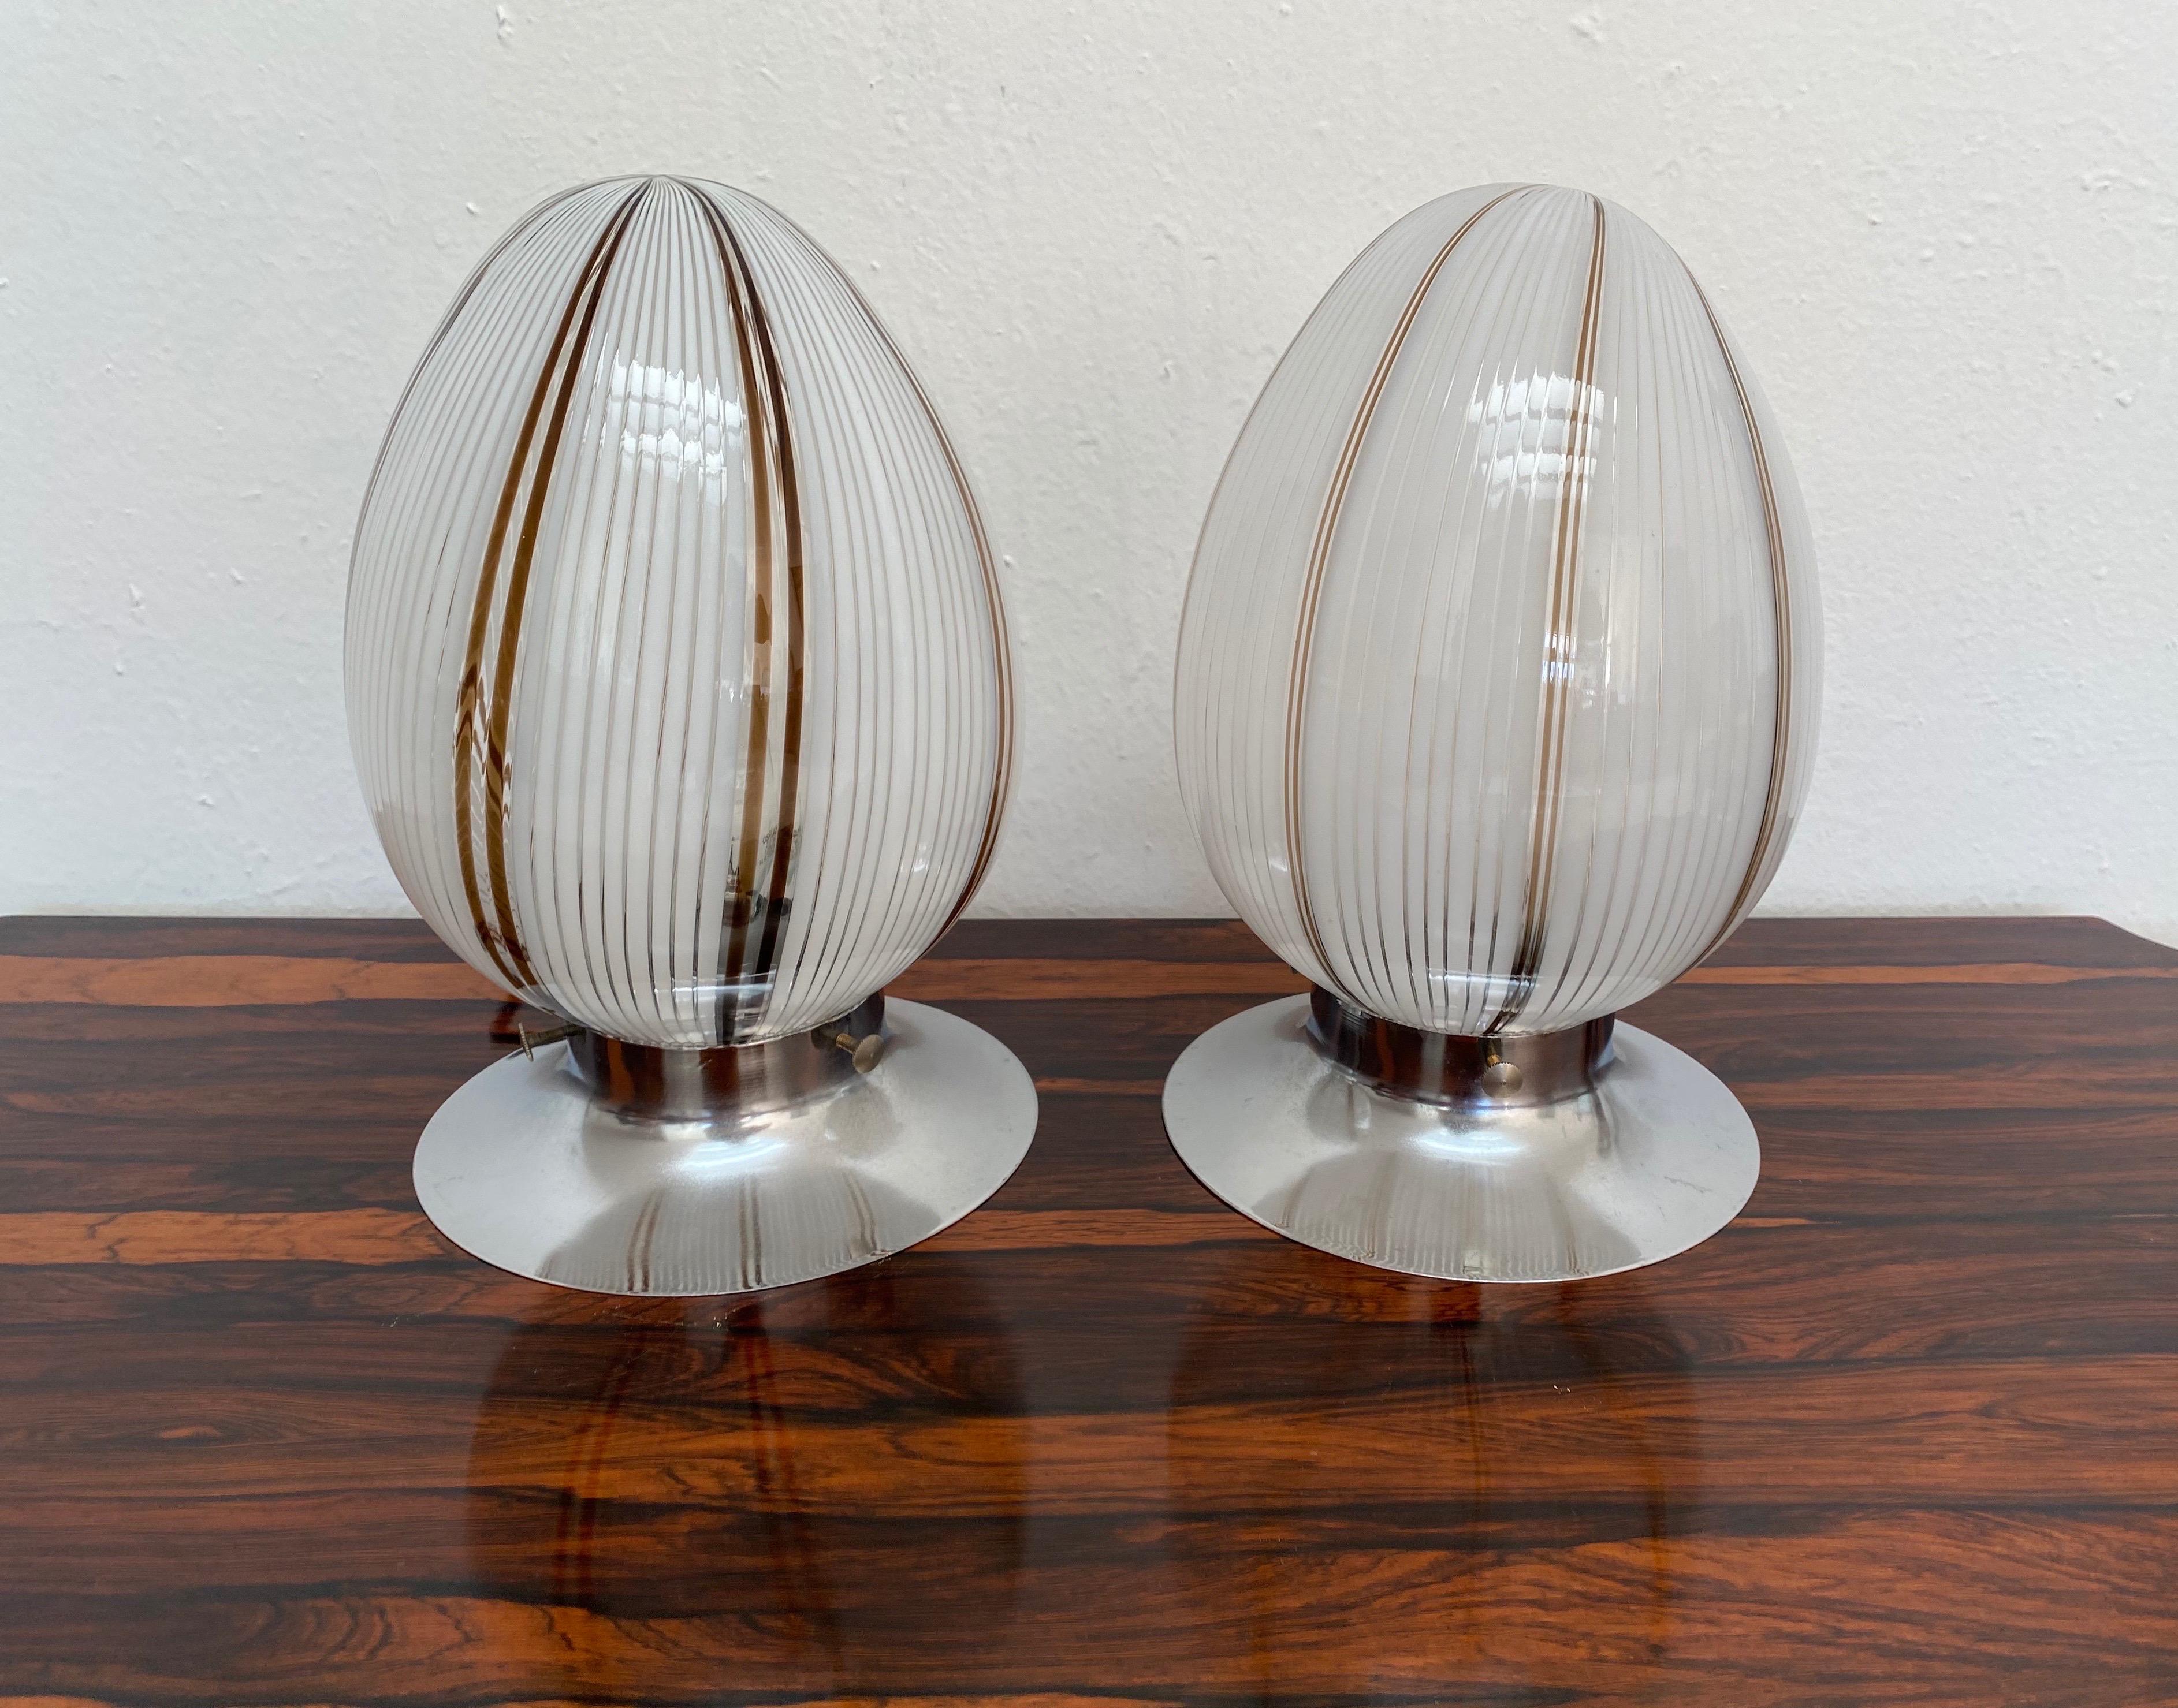 Late 20th Century Pair of Mid-Century Modern Table Lamps Attributed to Venini, Murano, circa 1980 For Sale